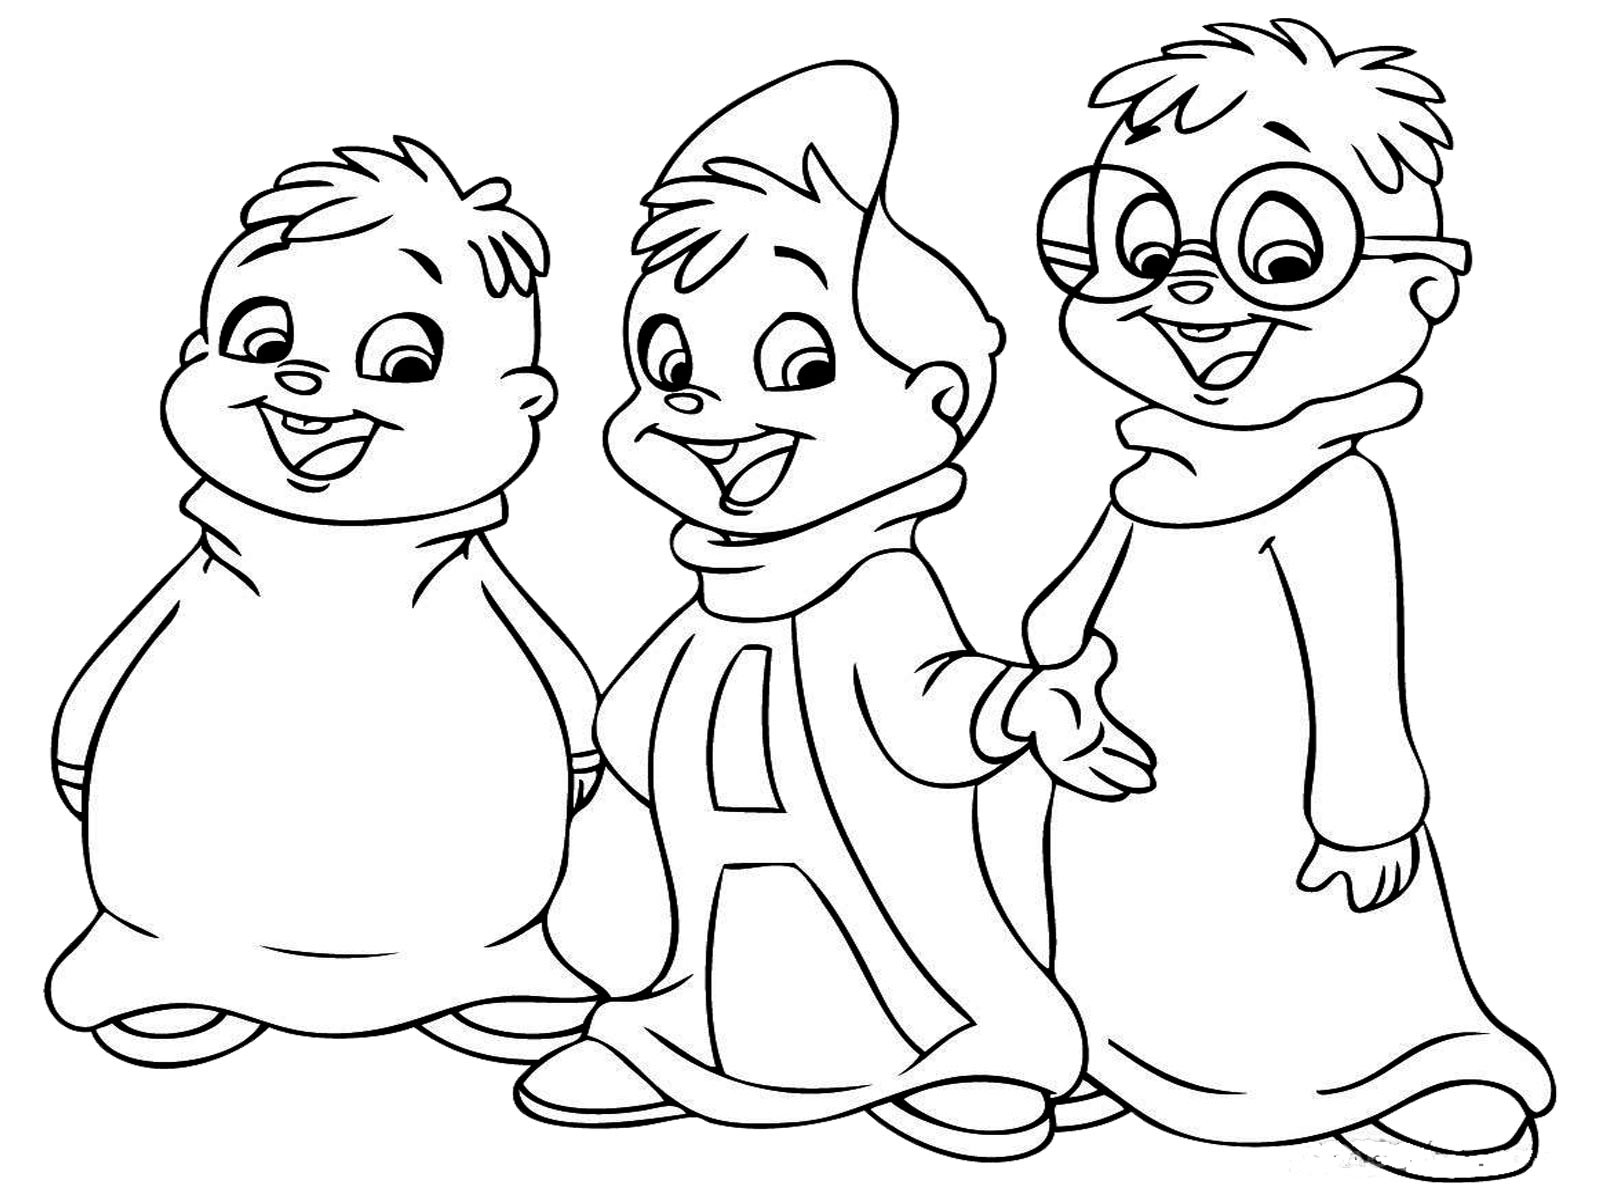 Coloring Sheet For Boys
 Coloring Pages for Boys 2018 Dr Odd